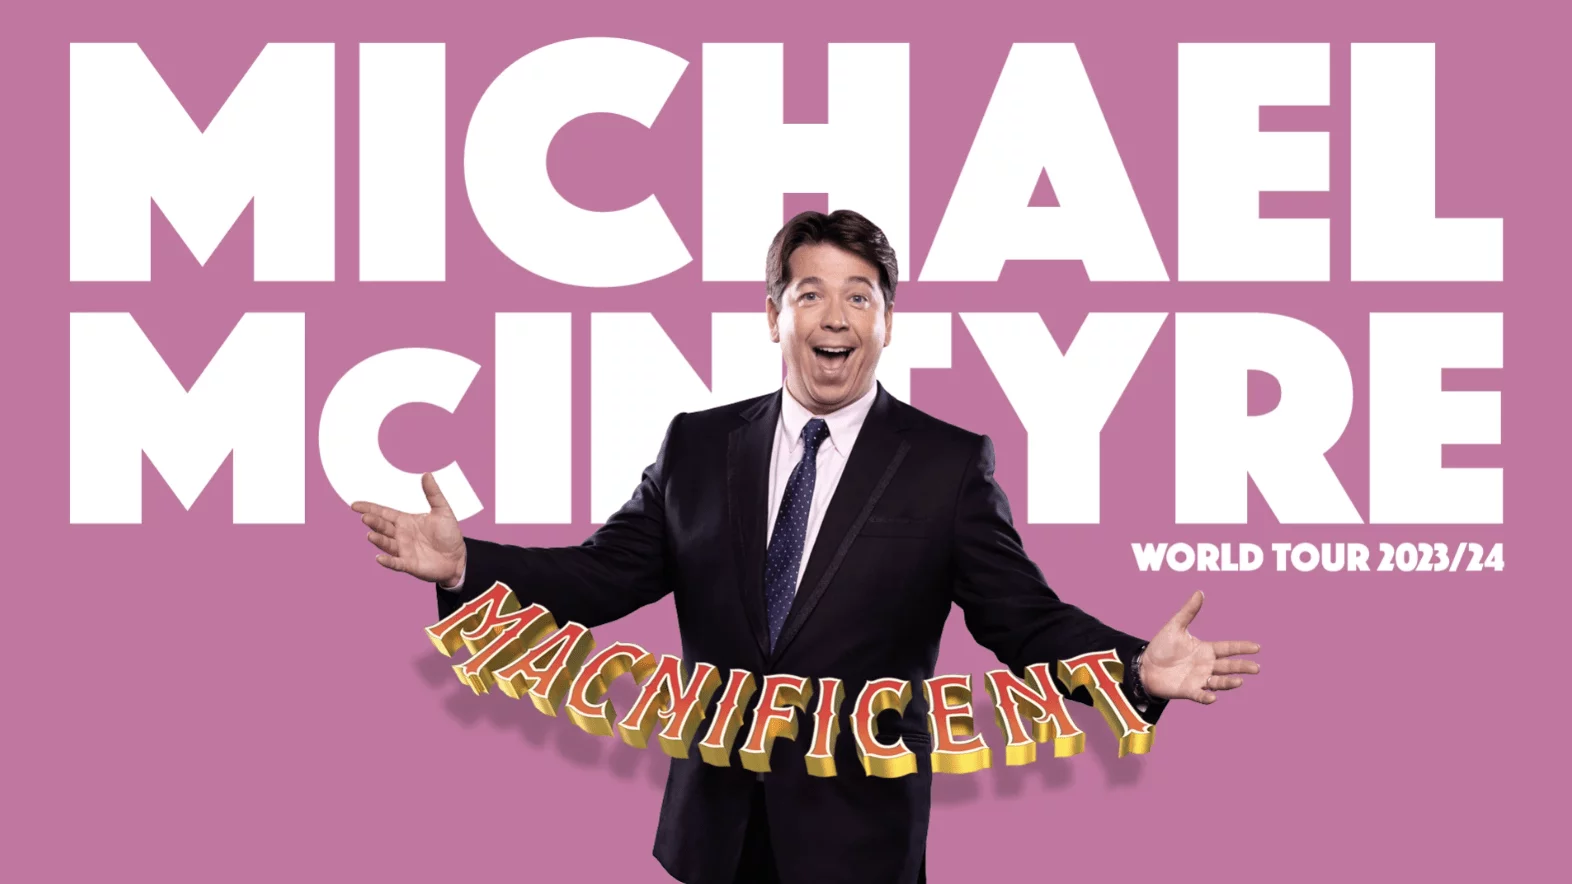 Michael McIntyre is back on stage with his brand new show MACNIFICENT!